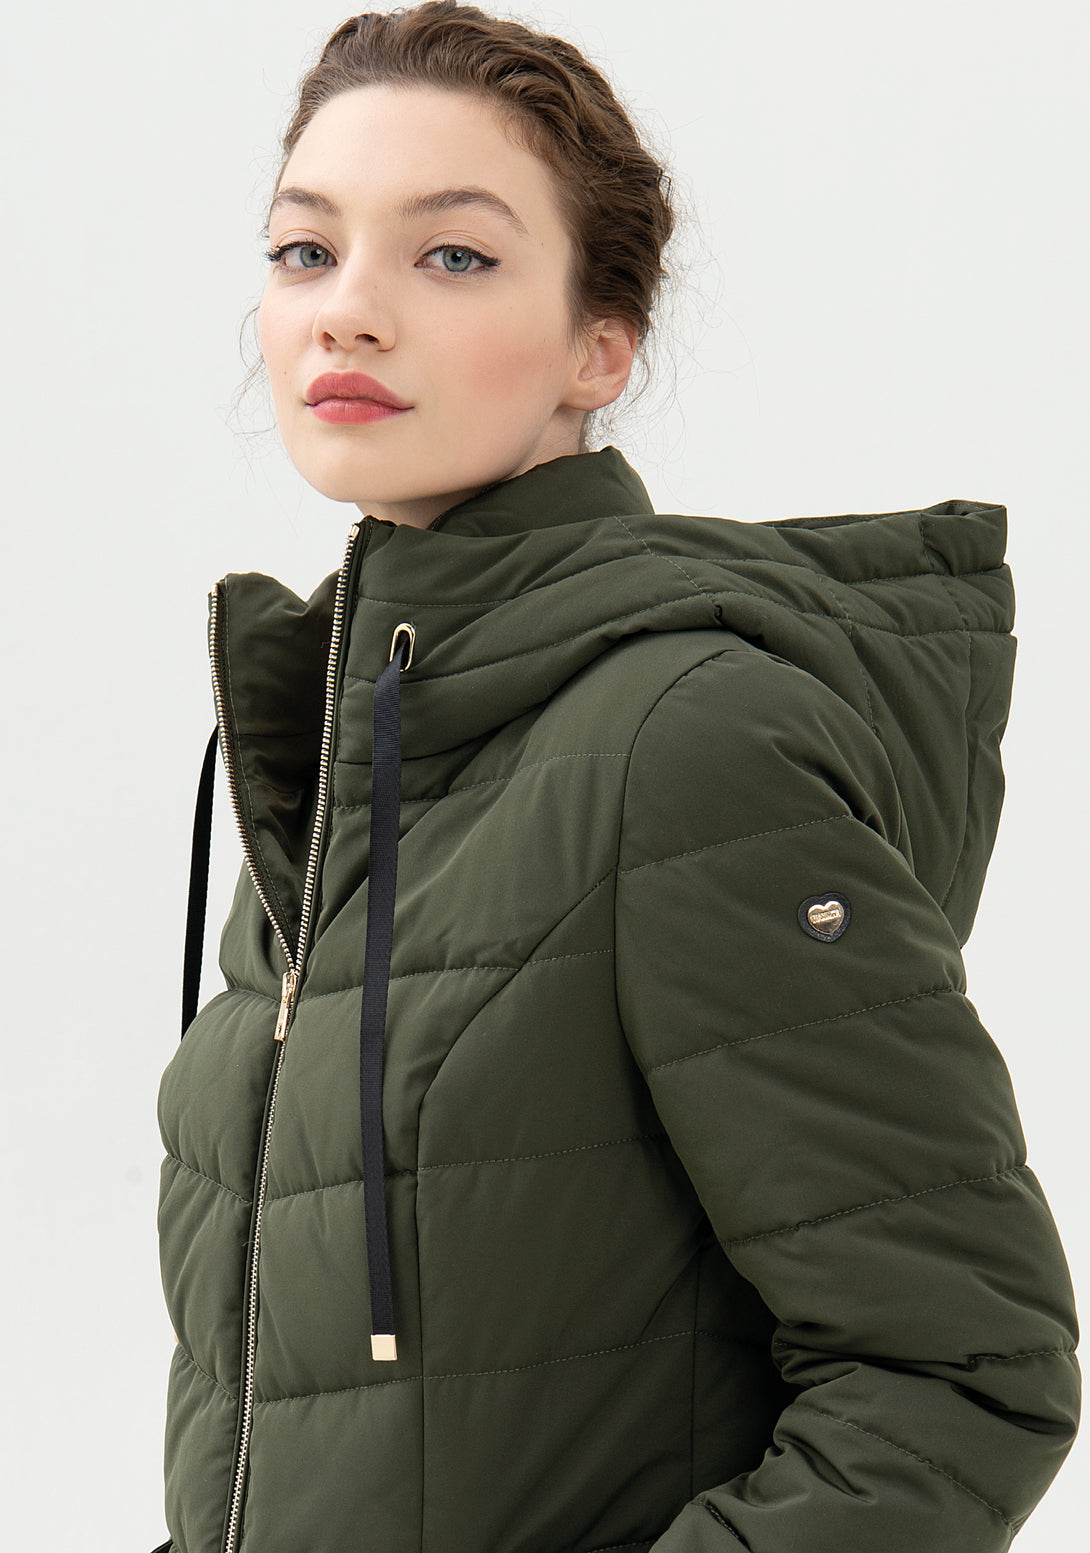 Padded jacket regular fit, long, made in quilted nylon